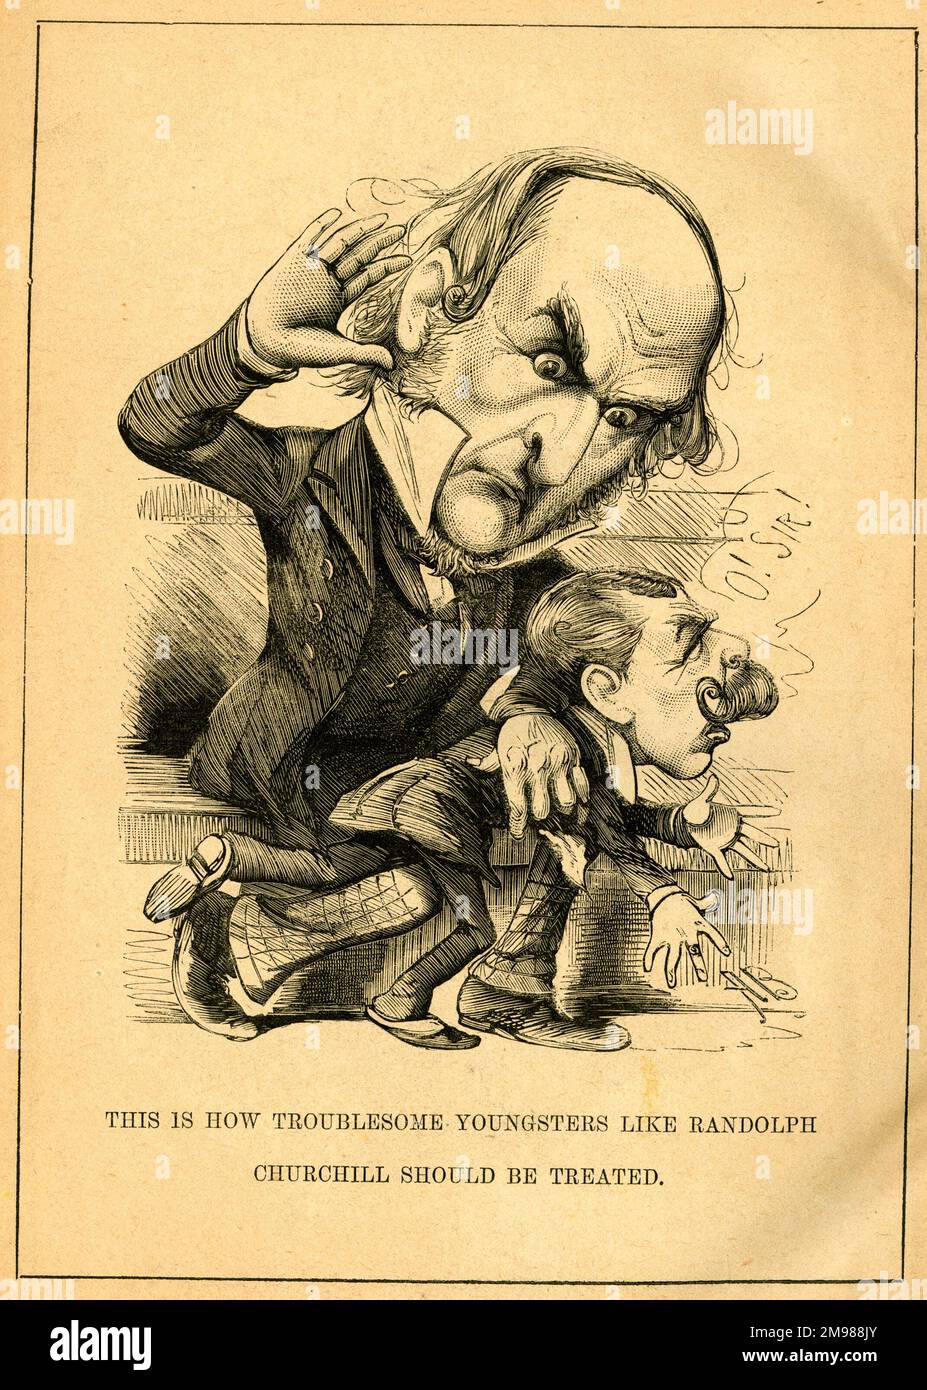 Cartoon, William Gladstone (1809-1898), Liberal Prime Minister, punishing his younger political colleague, Lord Randolph Henry Spencer Churchill (1849-1895), for causing trouble. Stock Photo